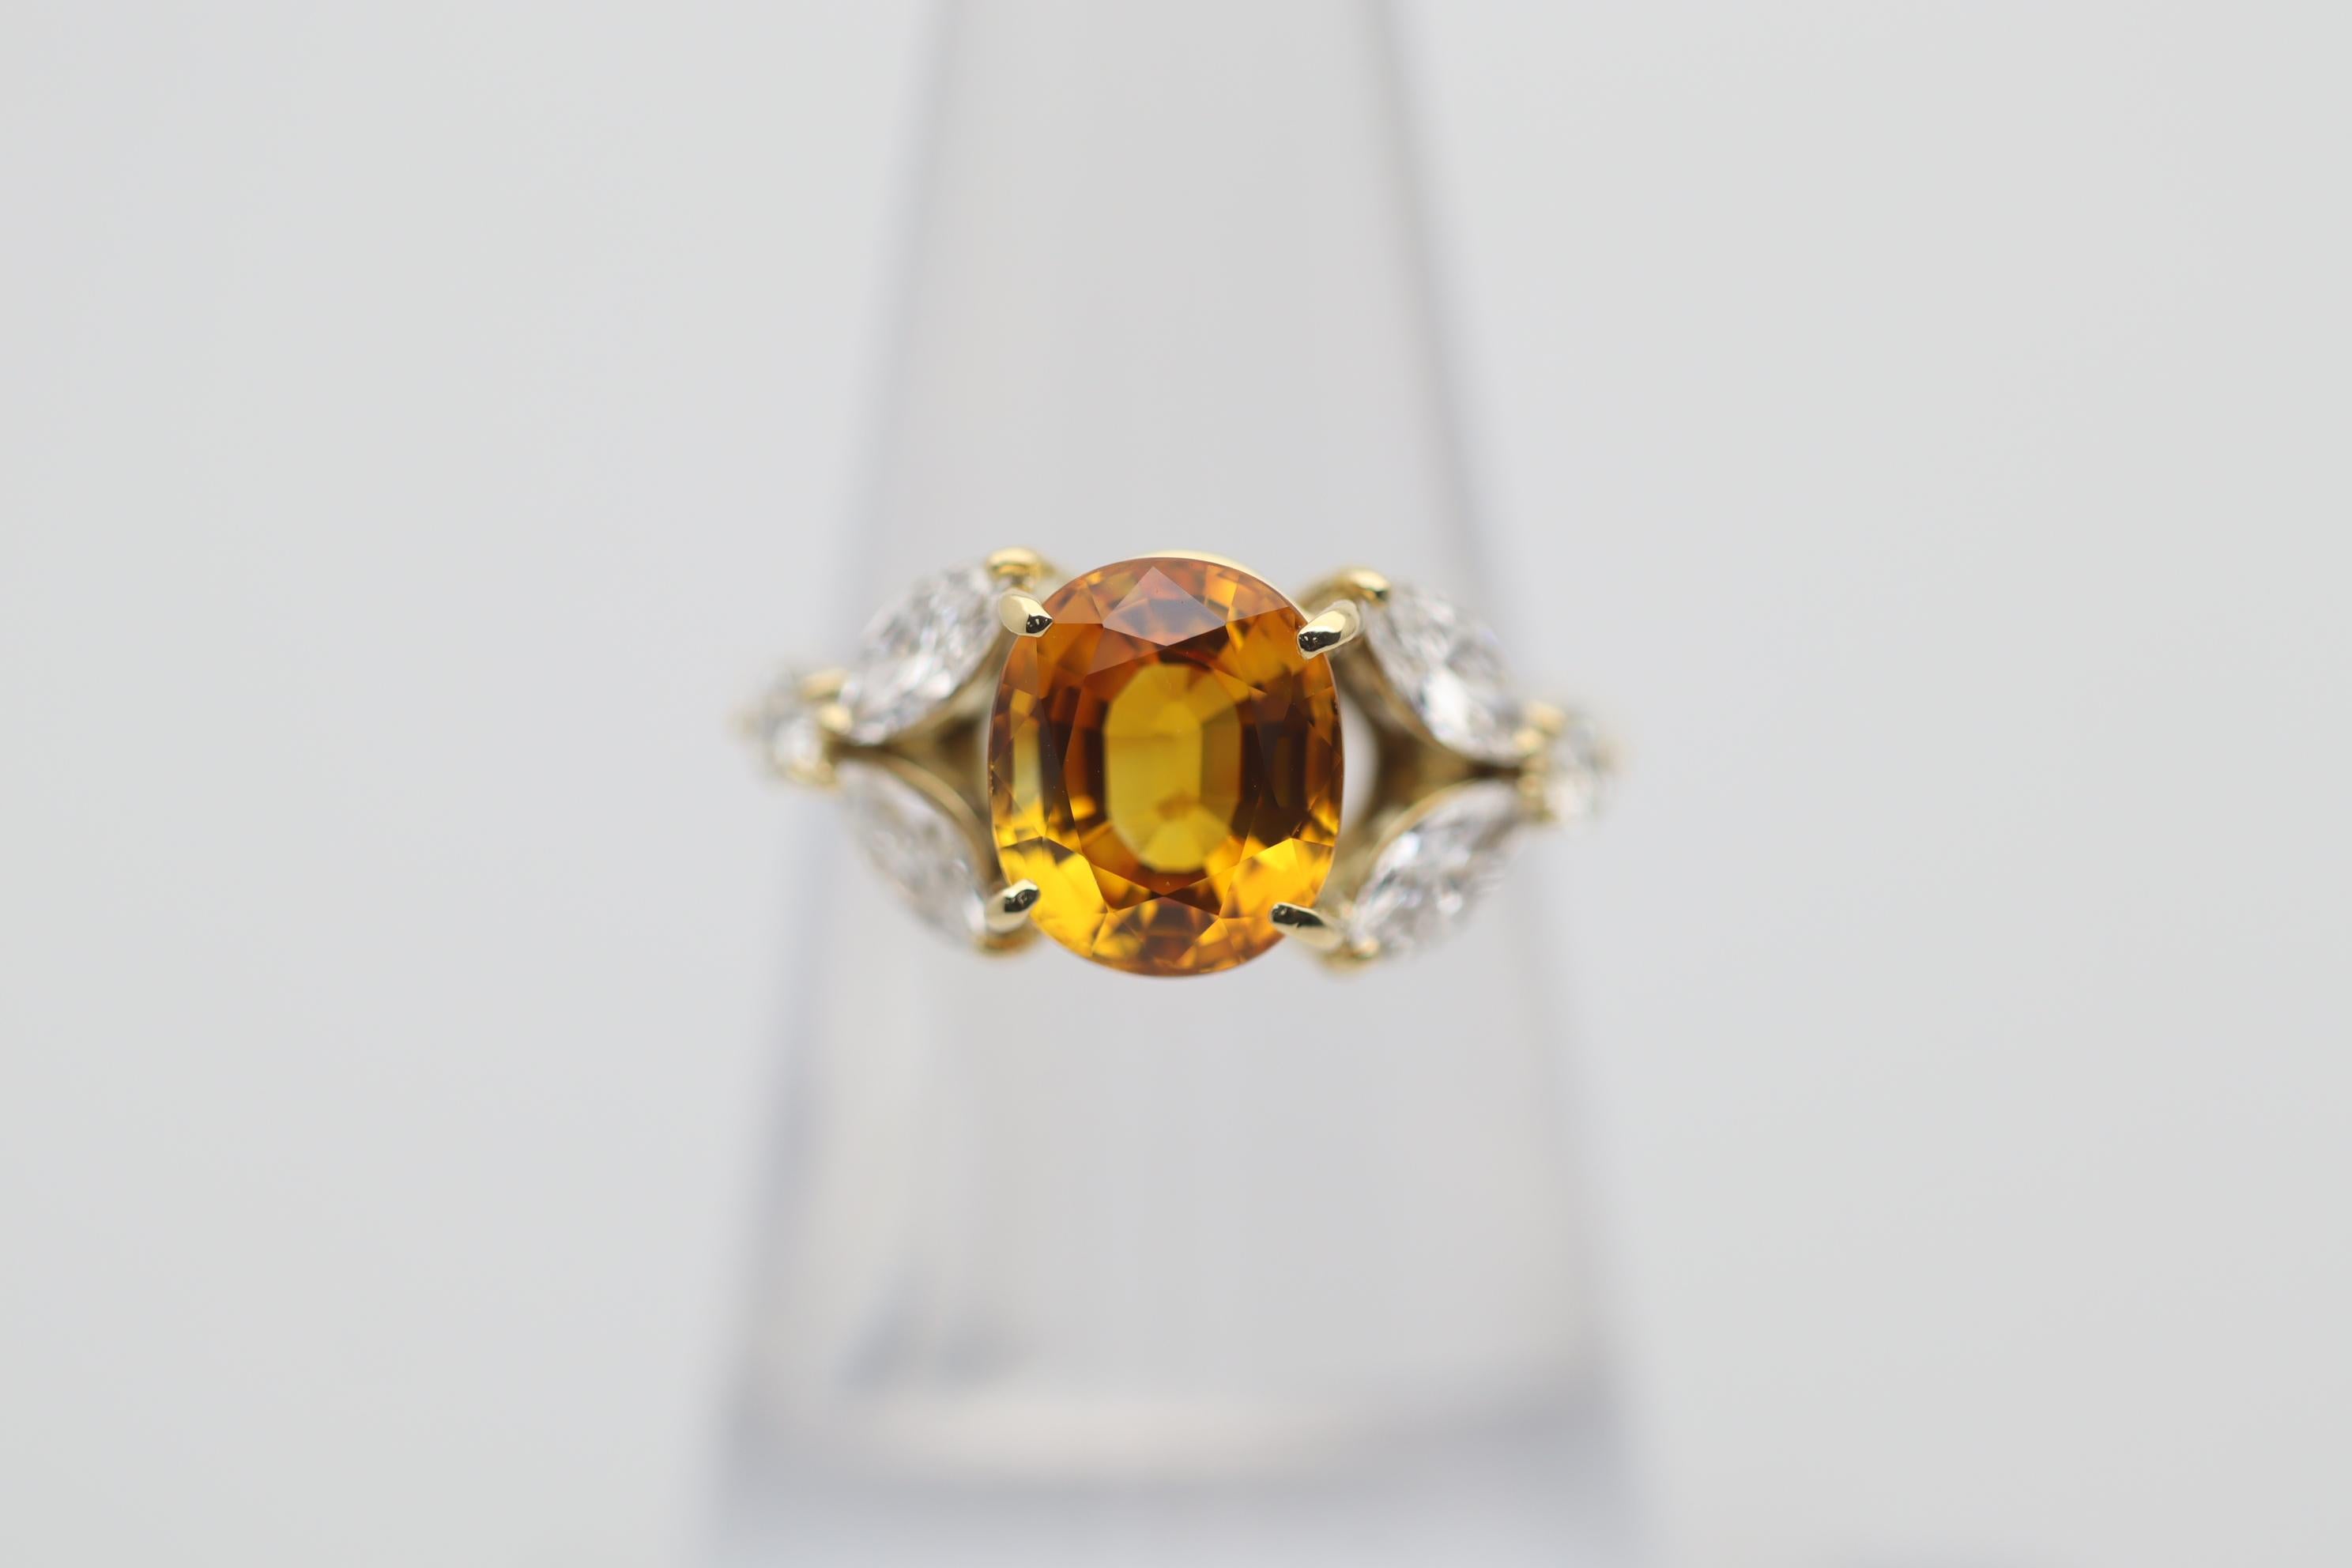 A sweet and stylish ring featuring a bright vivid orange sapphire weighing 3.58 carats. It has a rich orange color and a lovely oval shape. Complementing the sapphire are 0.81 carats of large marquise and round brilliant-cut diamonds set in a floral